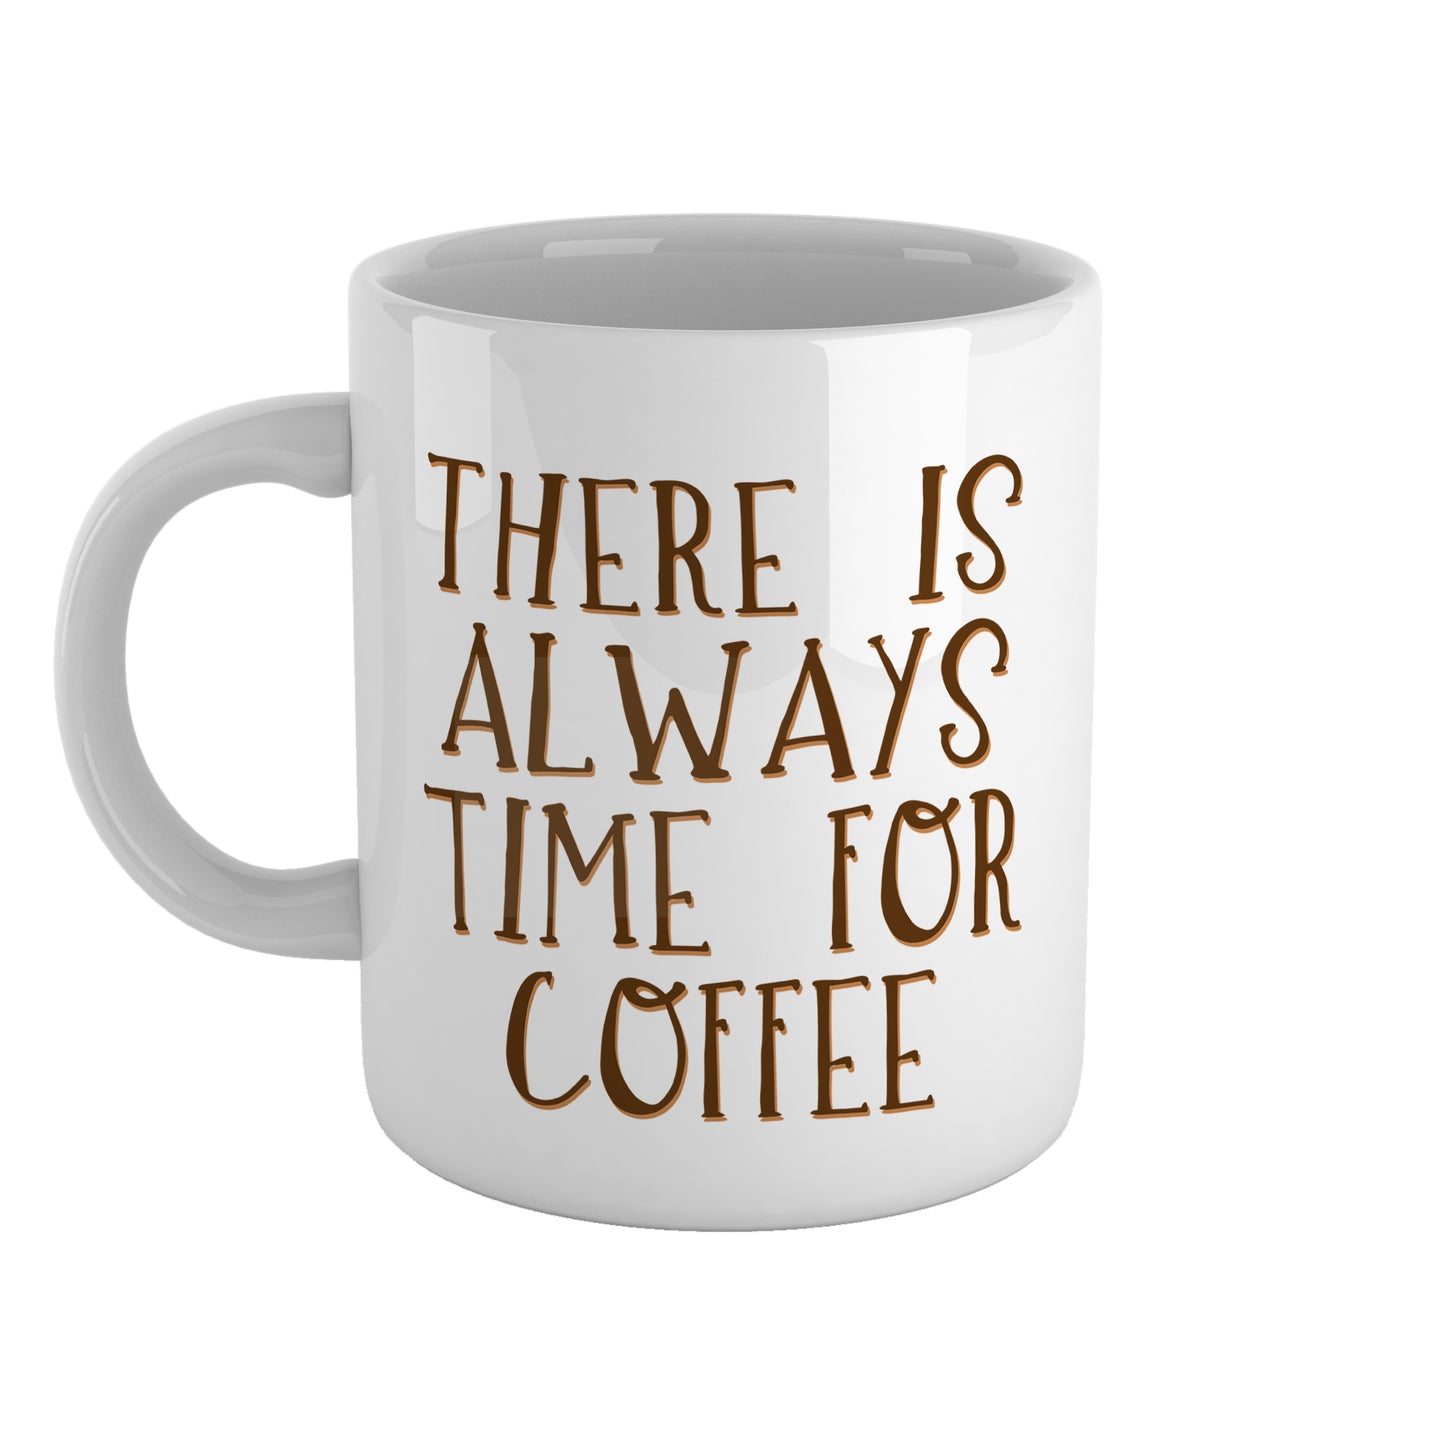 There is always time for coffee | Ceramic mug